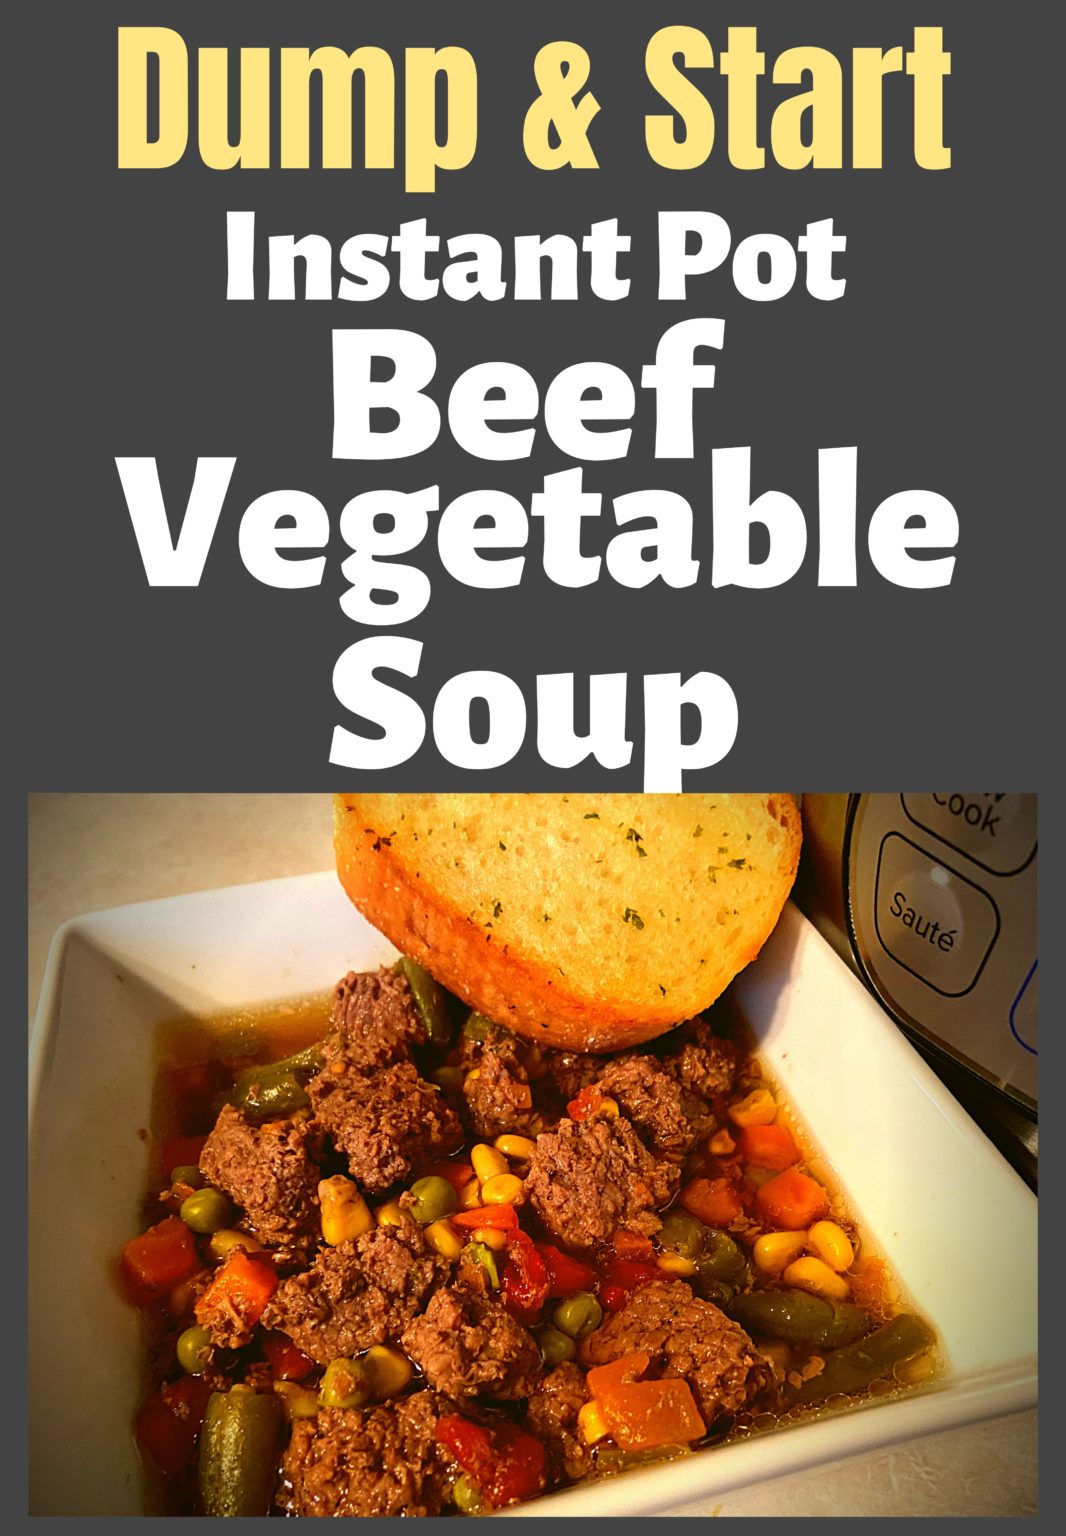 Dump and Start Instant Pot Beef Vegetable Soup - The Peculiar Green Rose